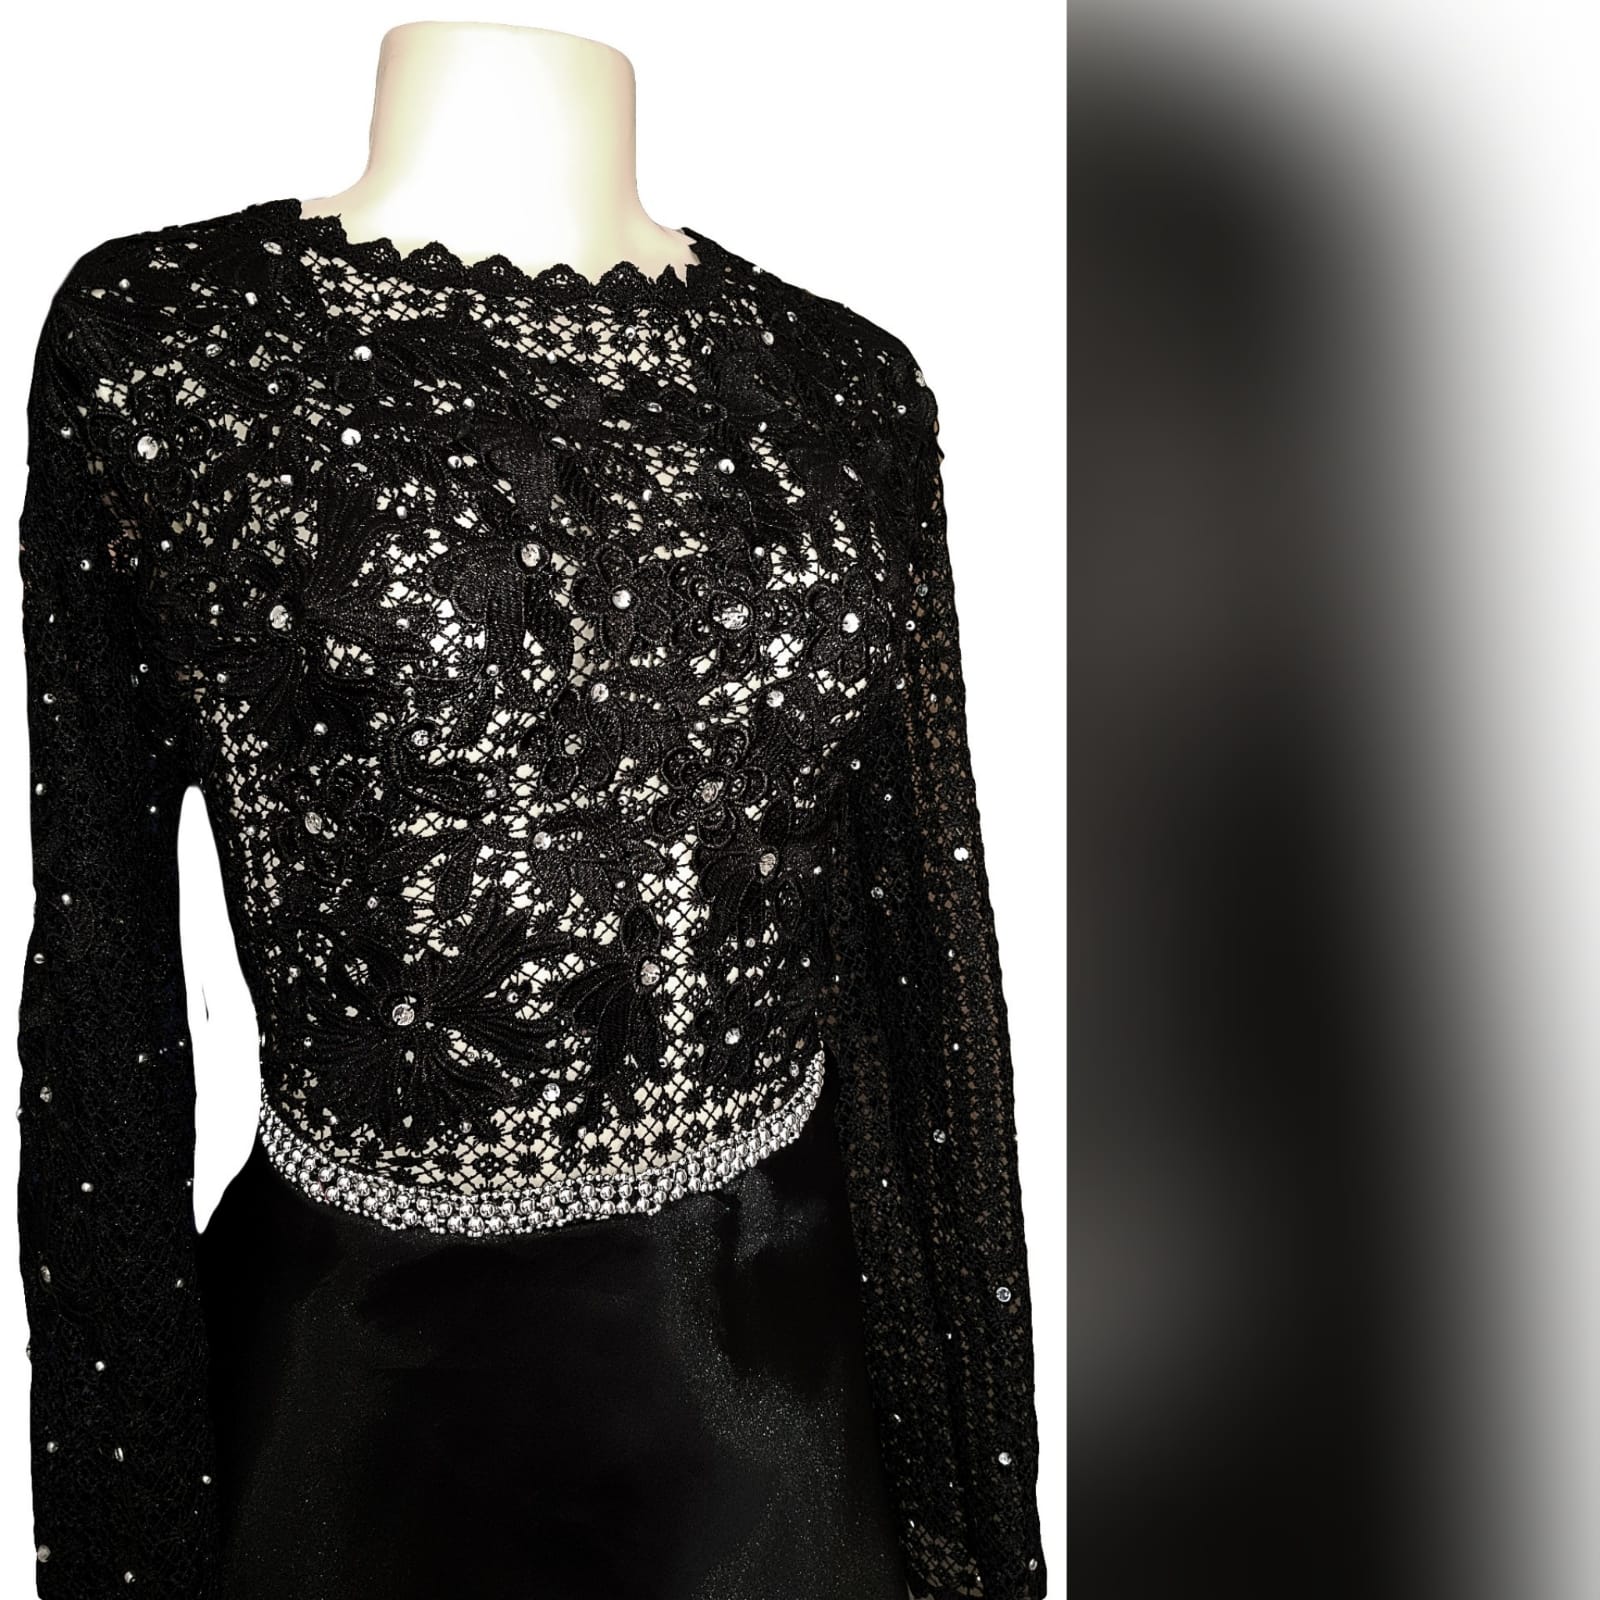 Black matric dress with a lace bodice 4 an elegant design created for a prom night. Black prom dress with a lace bodice with a slight sheer look detailed with silver beads and waist belt. Round neckline and long sleeves bottom flowy in a bridal organza